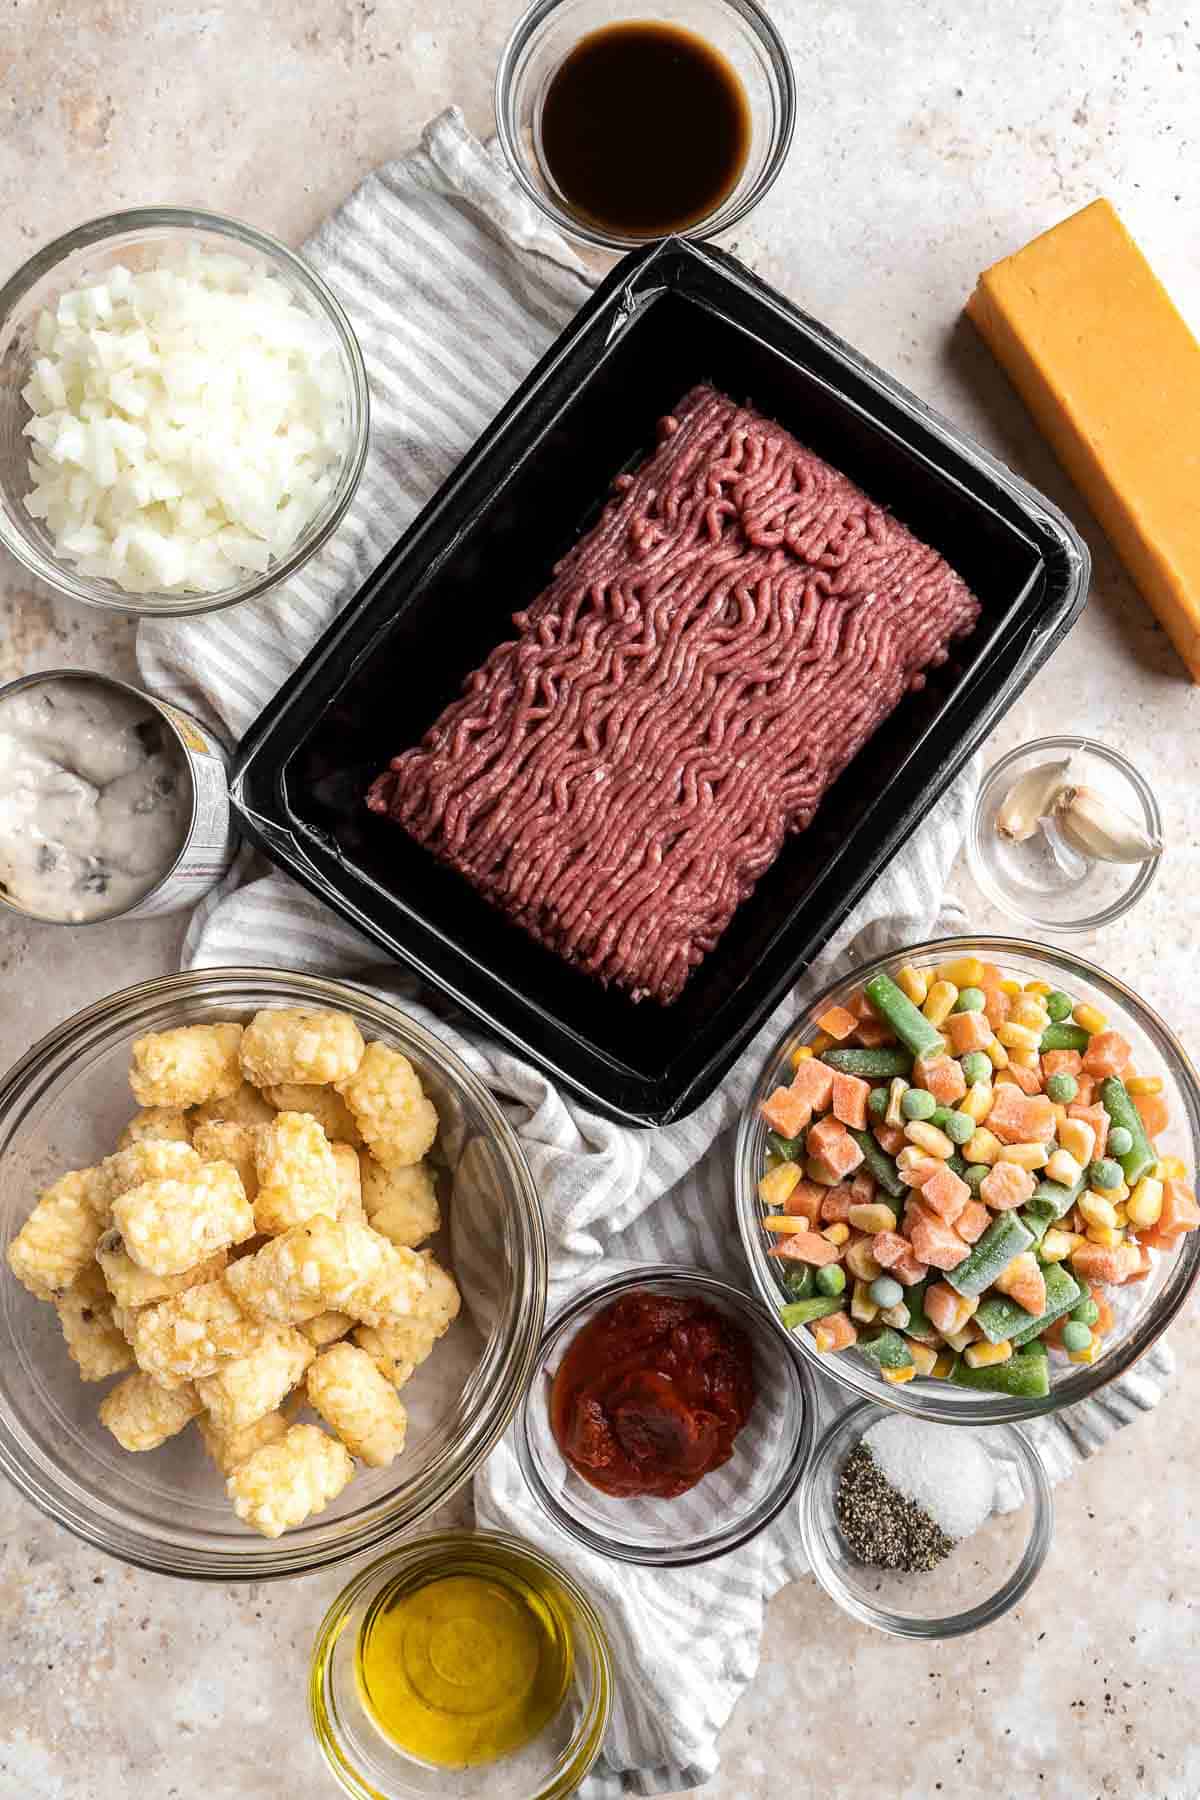 Tater Tot Casserole is classic comfort food that incorporates delicious layers of crispy tater tots, melted cheese and a creamy beef and vegetables mixture. | aheadofthyme.com